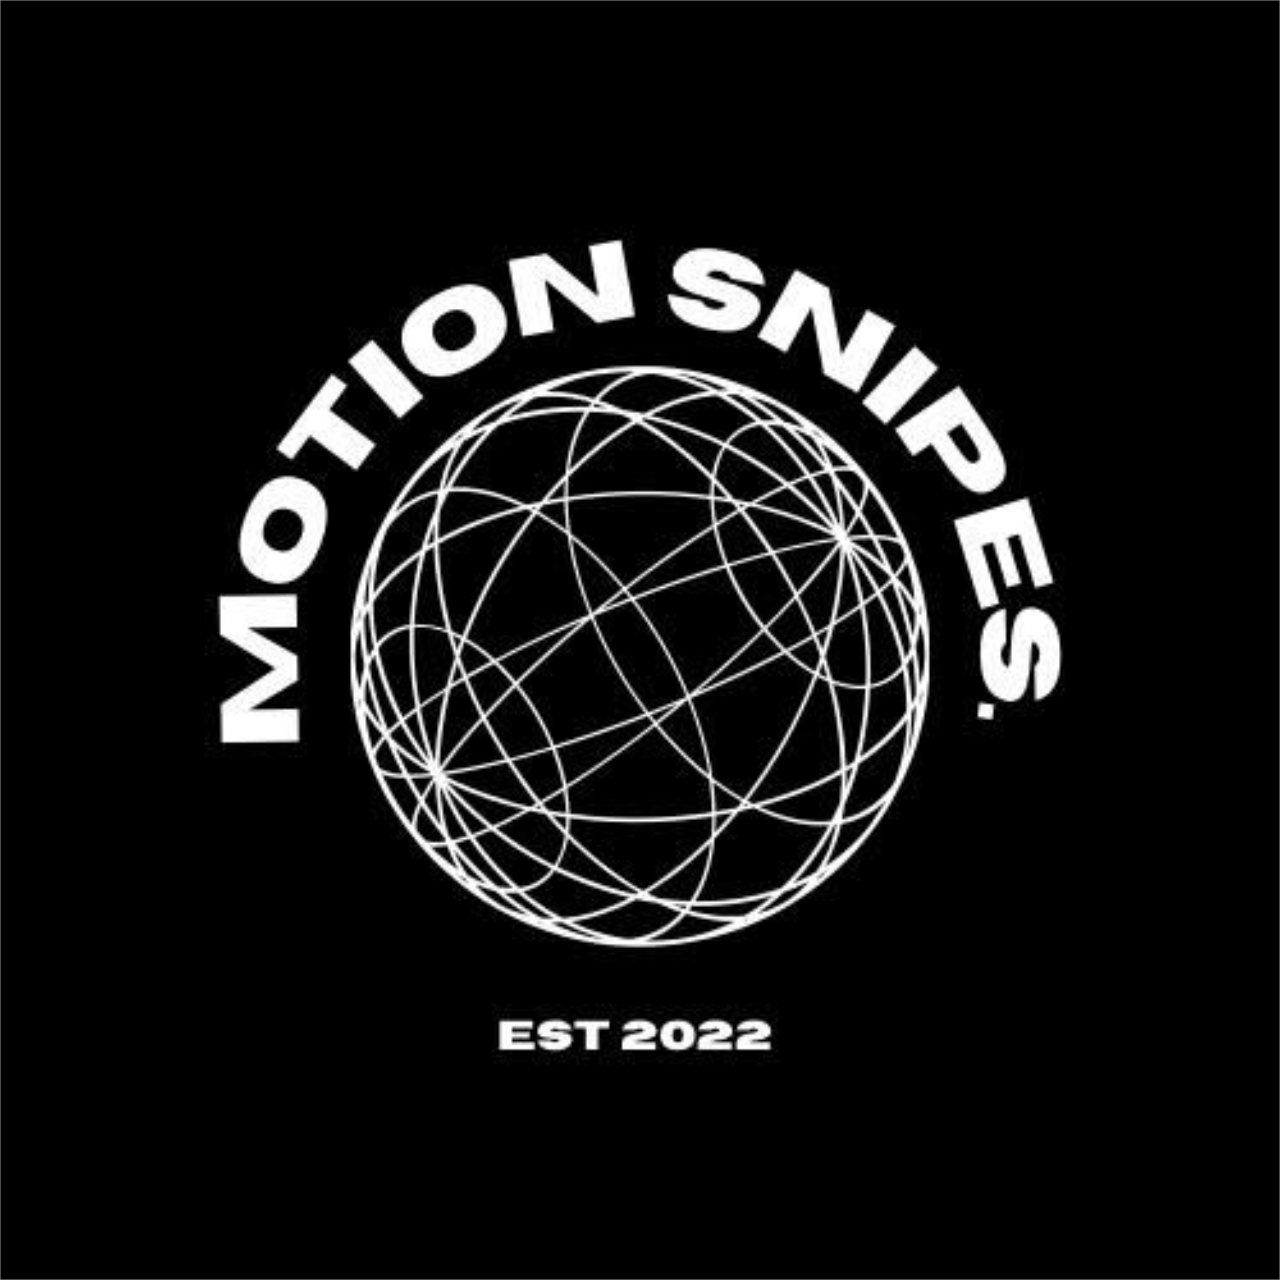 MOTION TRADES !'s web page